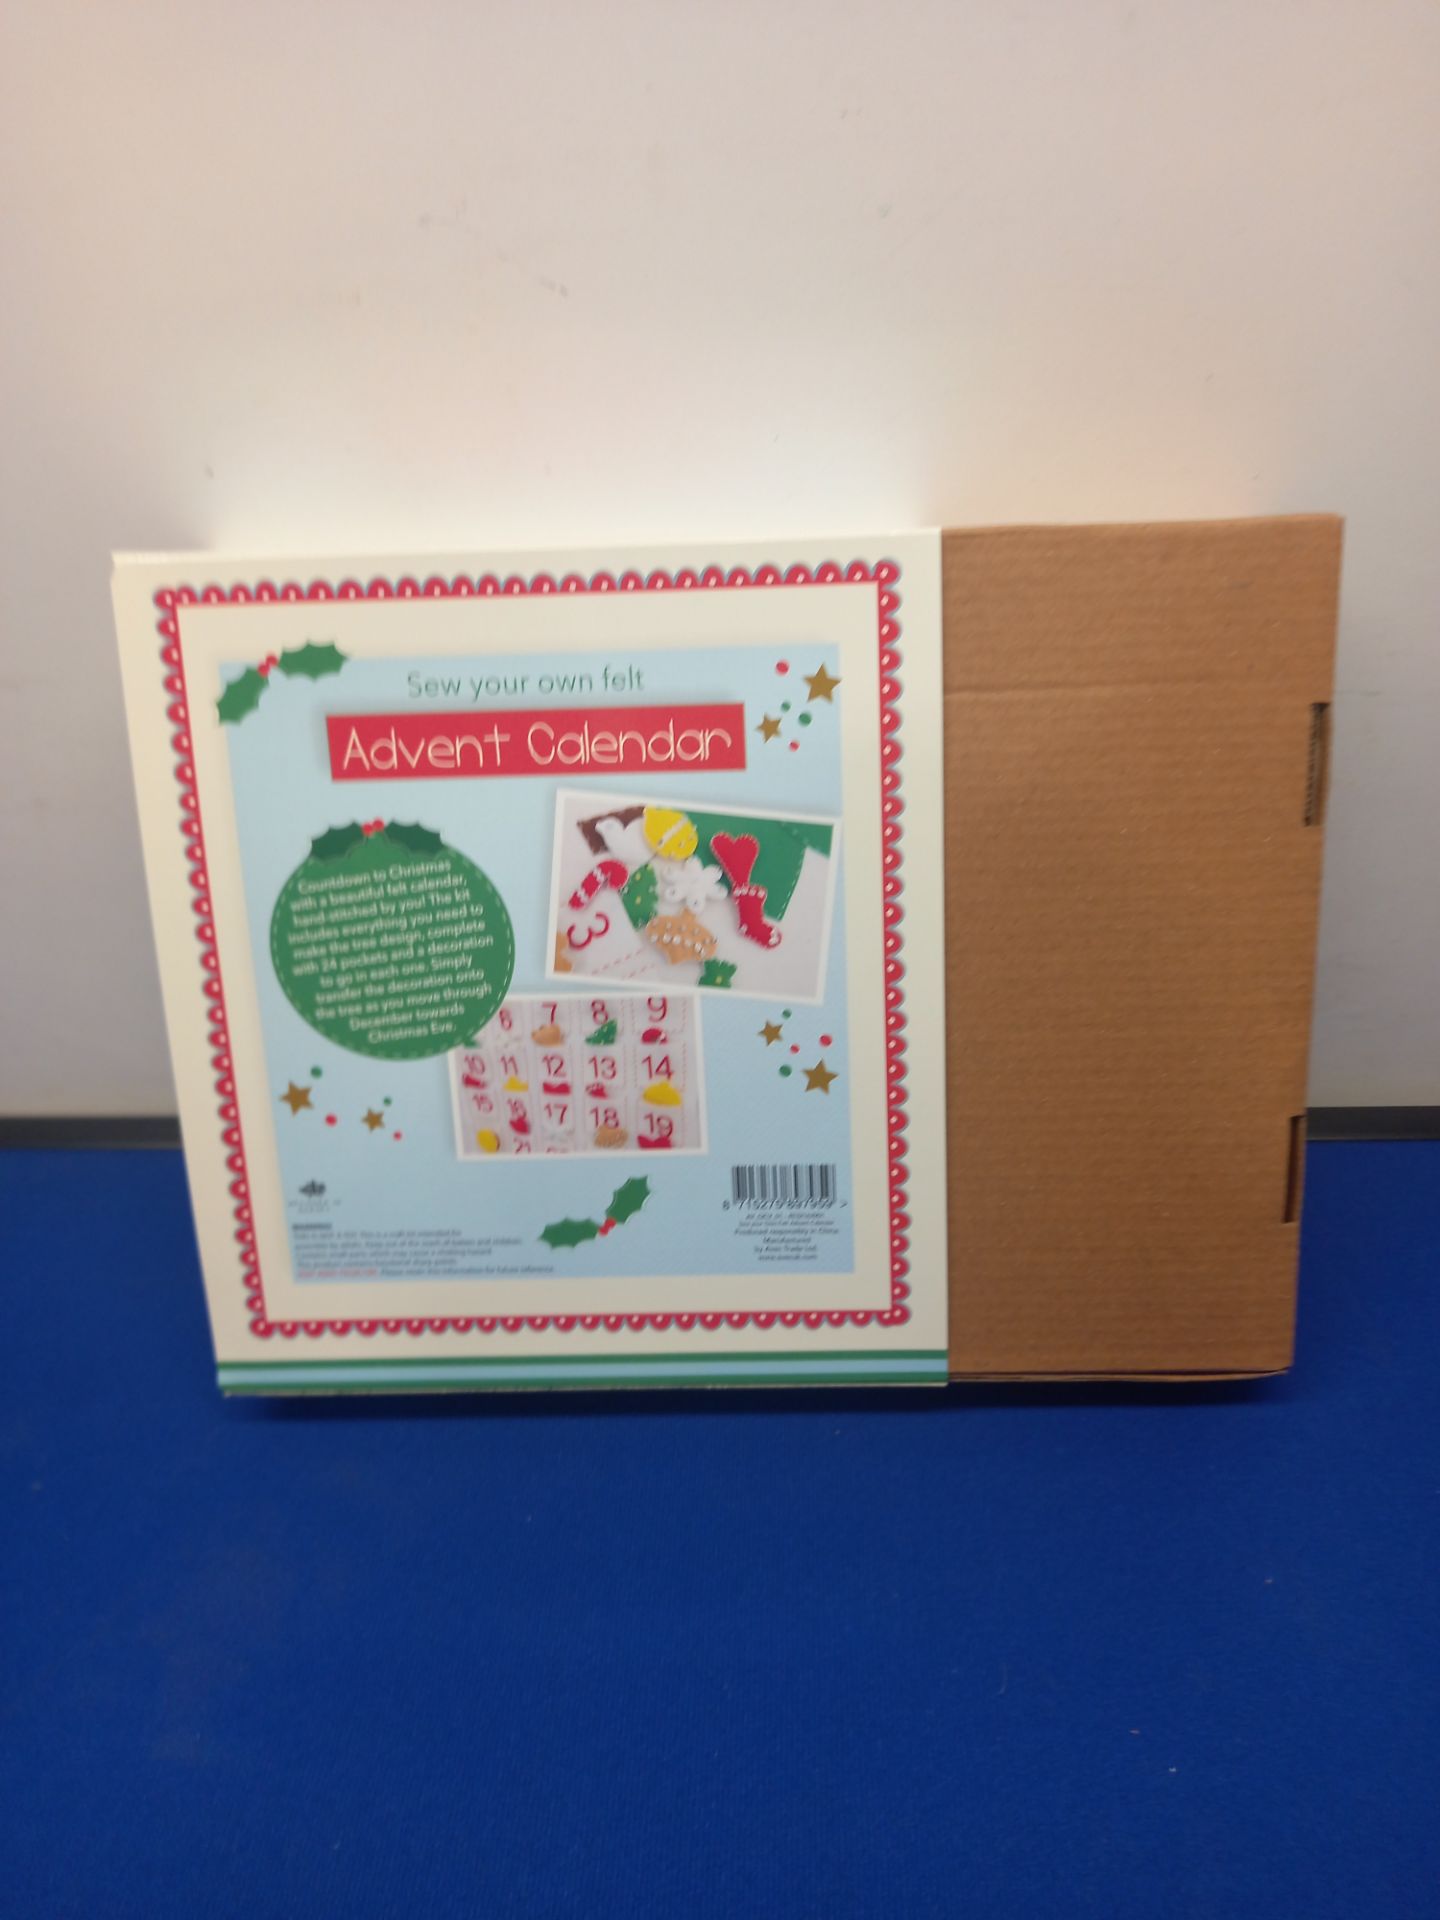 90 x Sew Your Own Felt Advent Calendars - Image 3 of 4